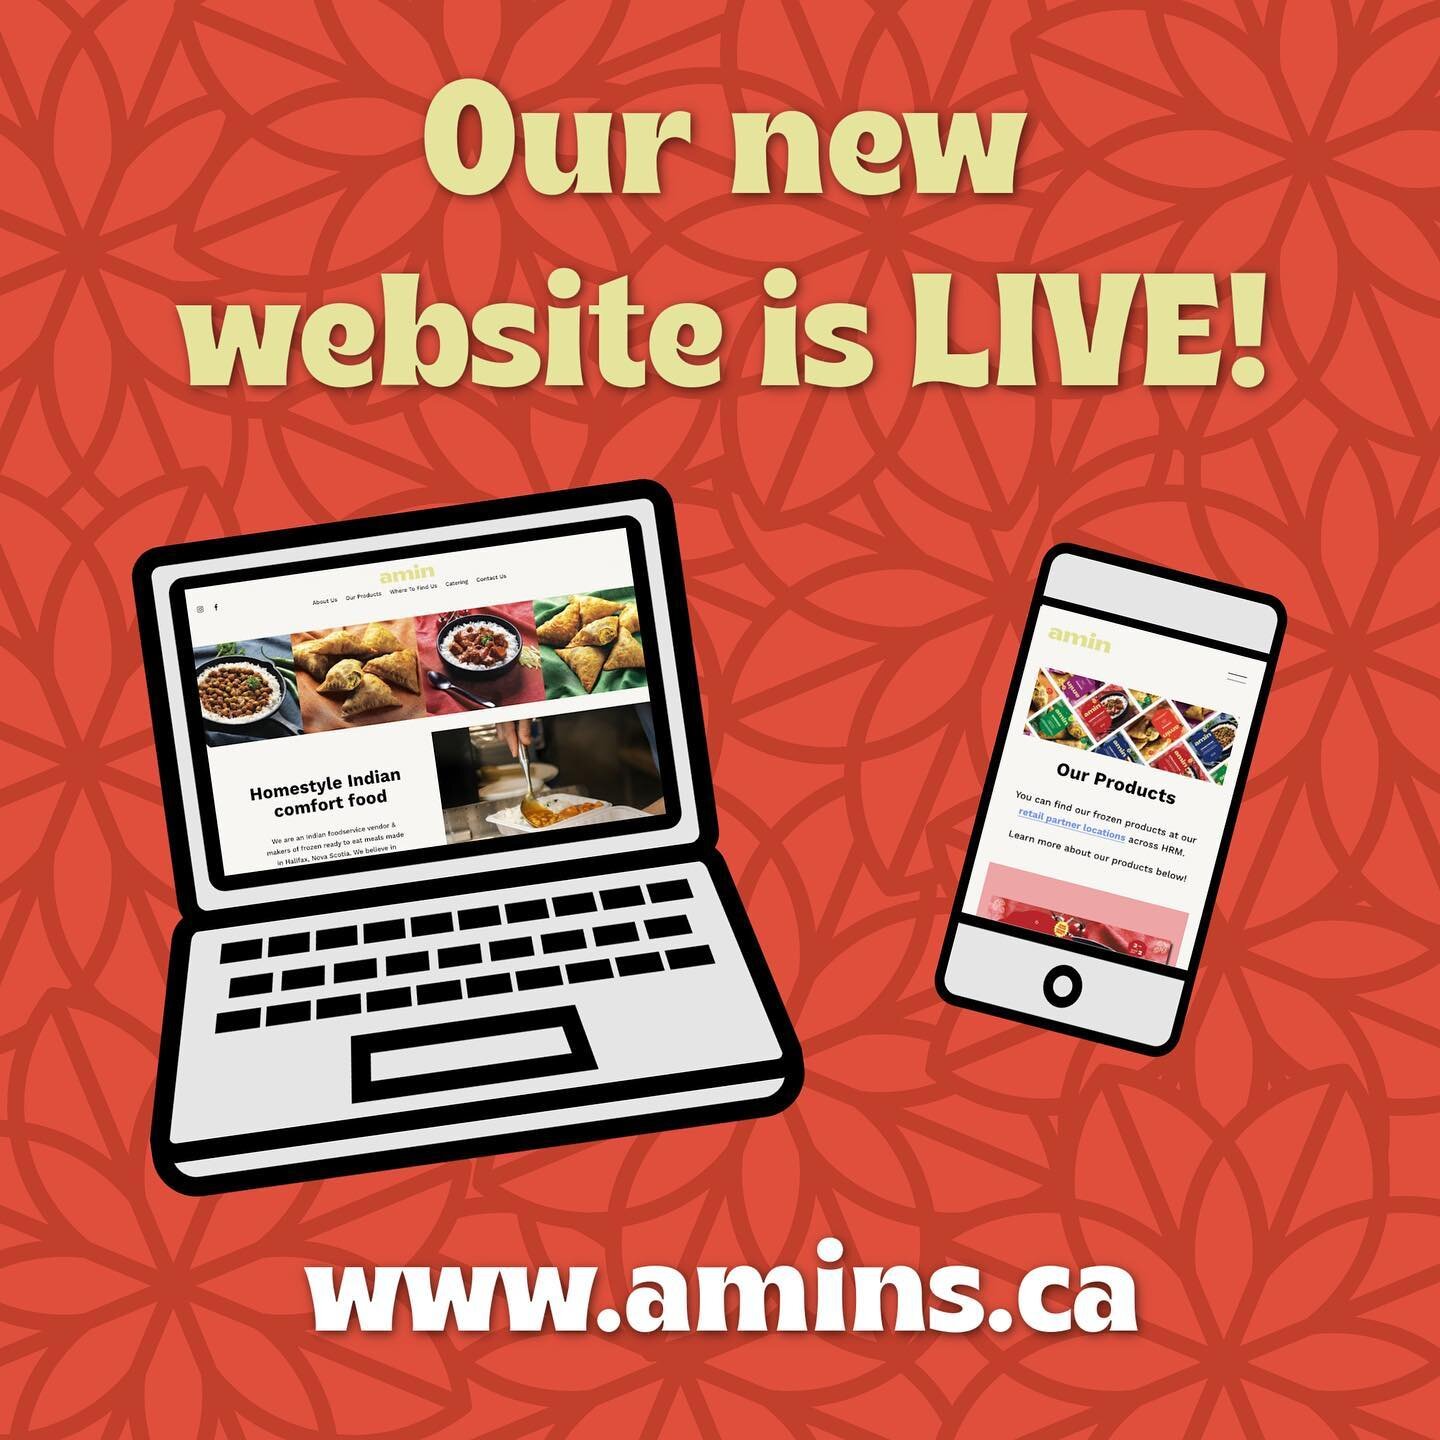 Exciting news: our website is officially LIVE! 🎉❤️

Check it out at www.amins.ca - link in bio 🔗 let us know what you think!